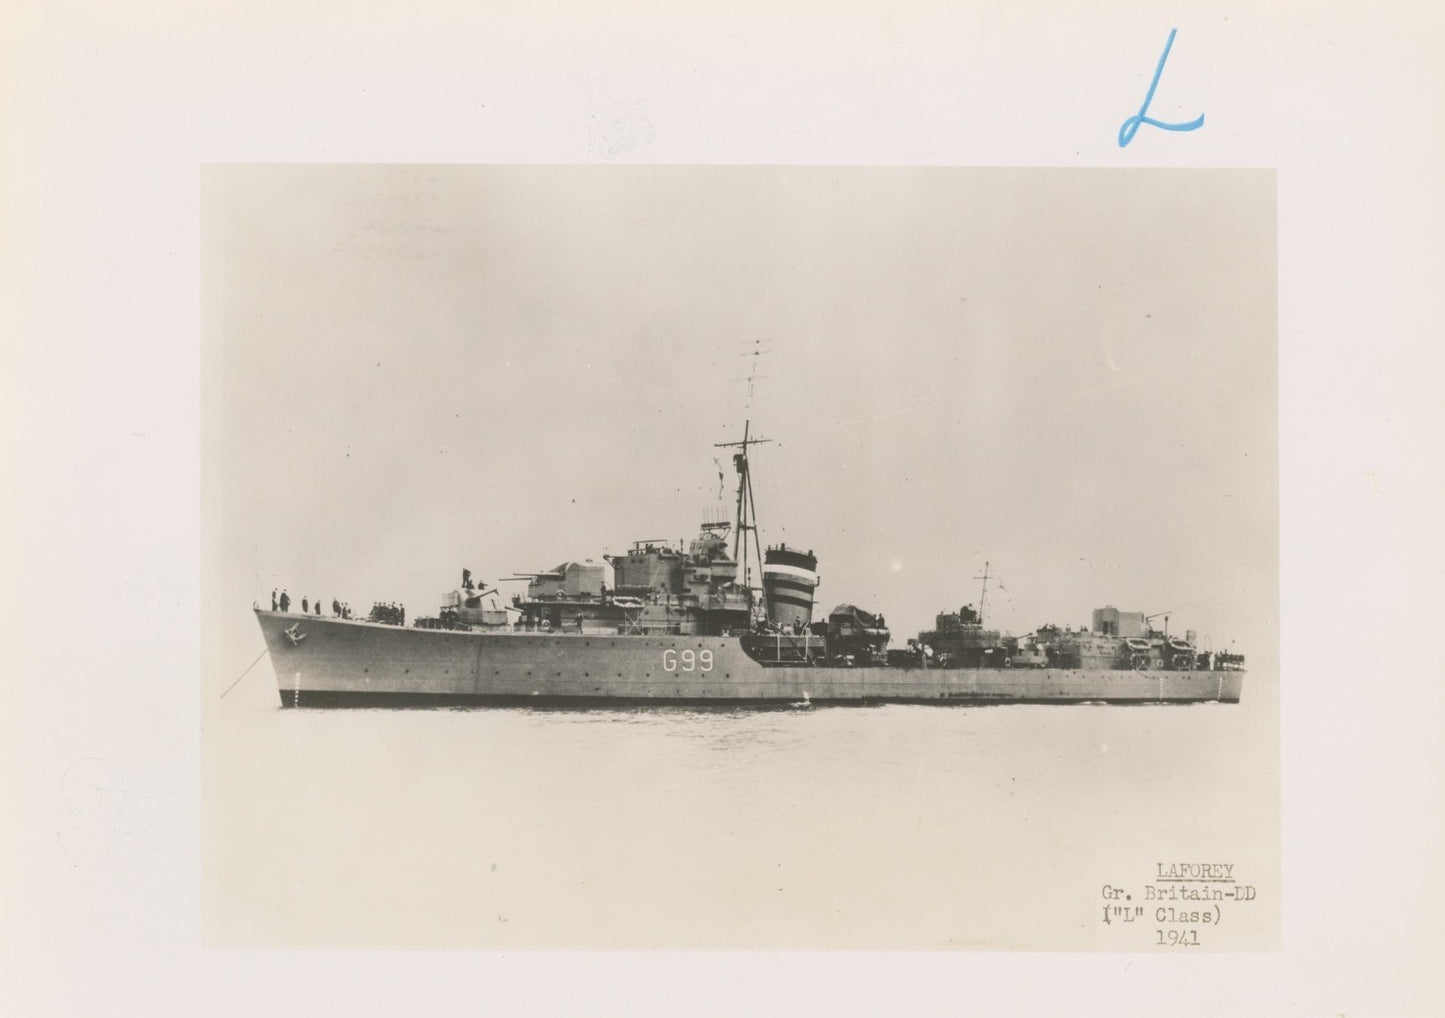 British and Canadian "L" Class Destroyers